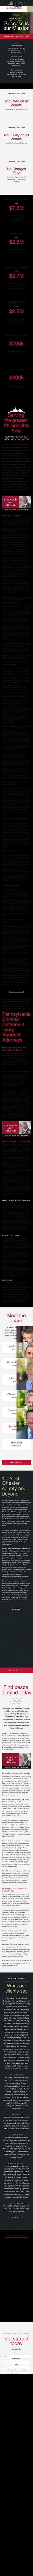 Ciccarelli Law Offices - Radnor PA Lawyers